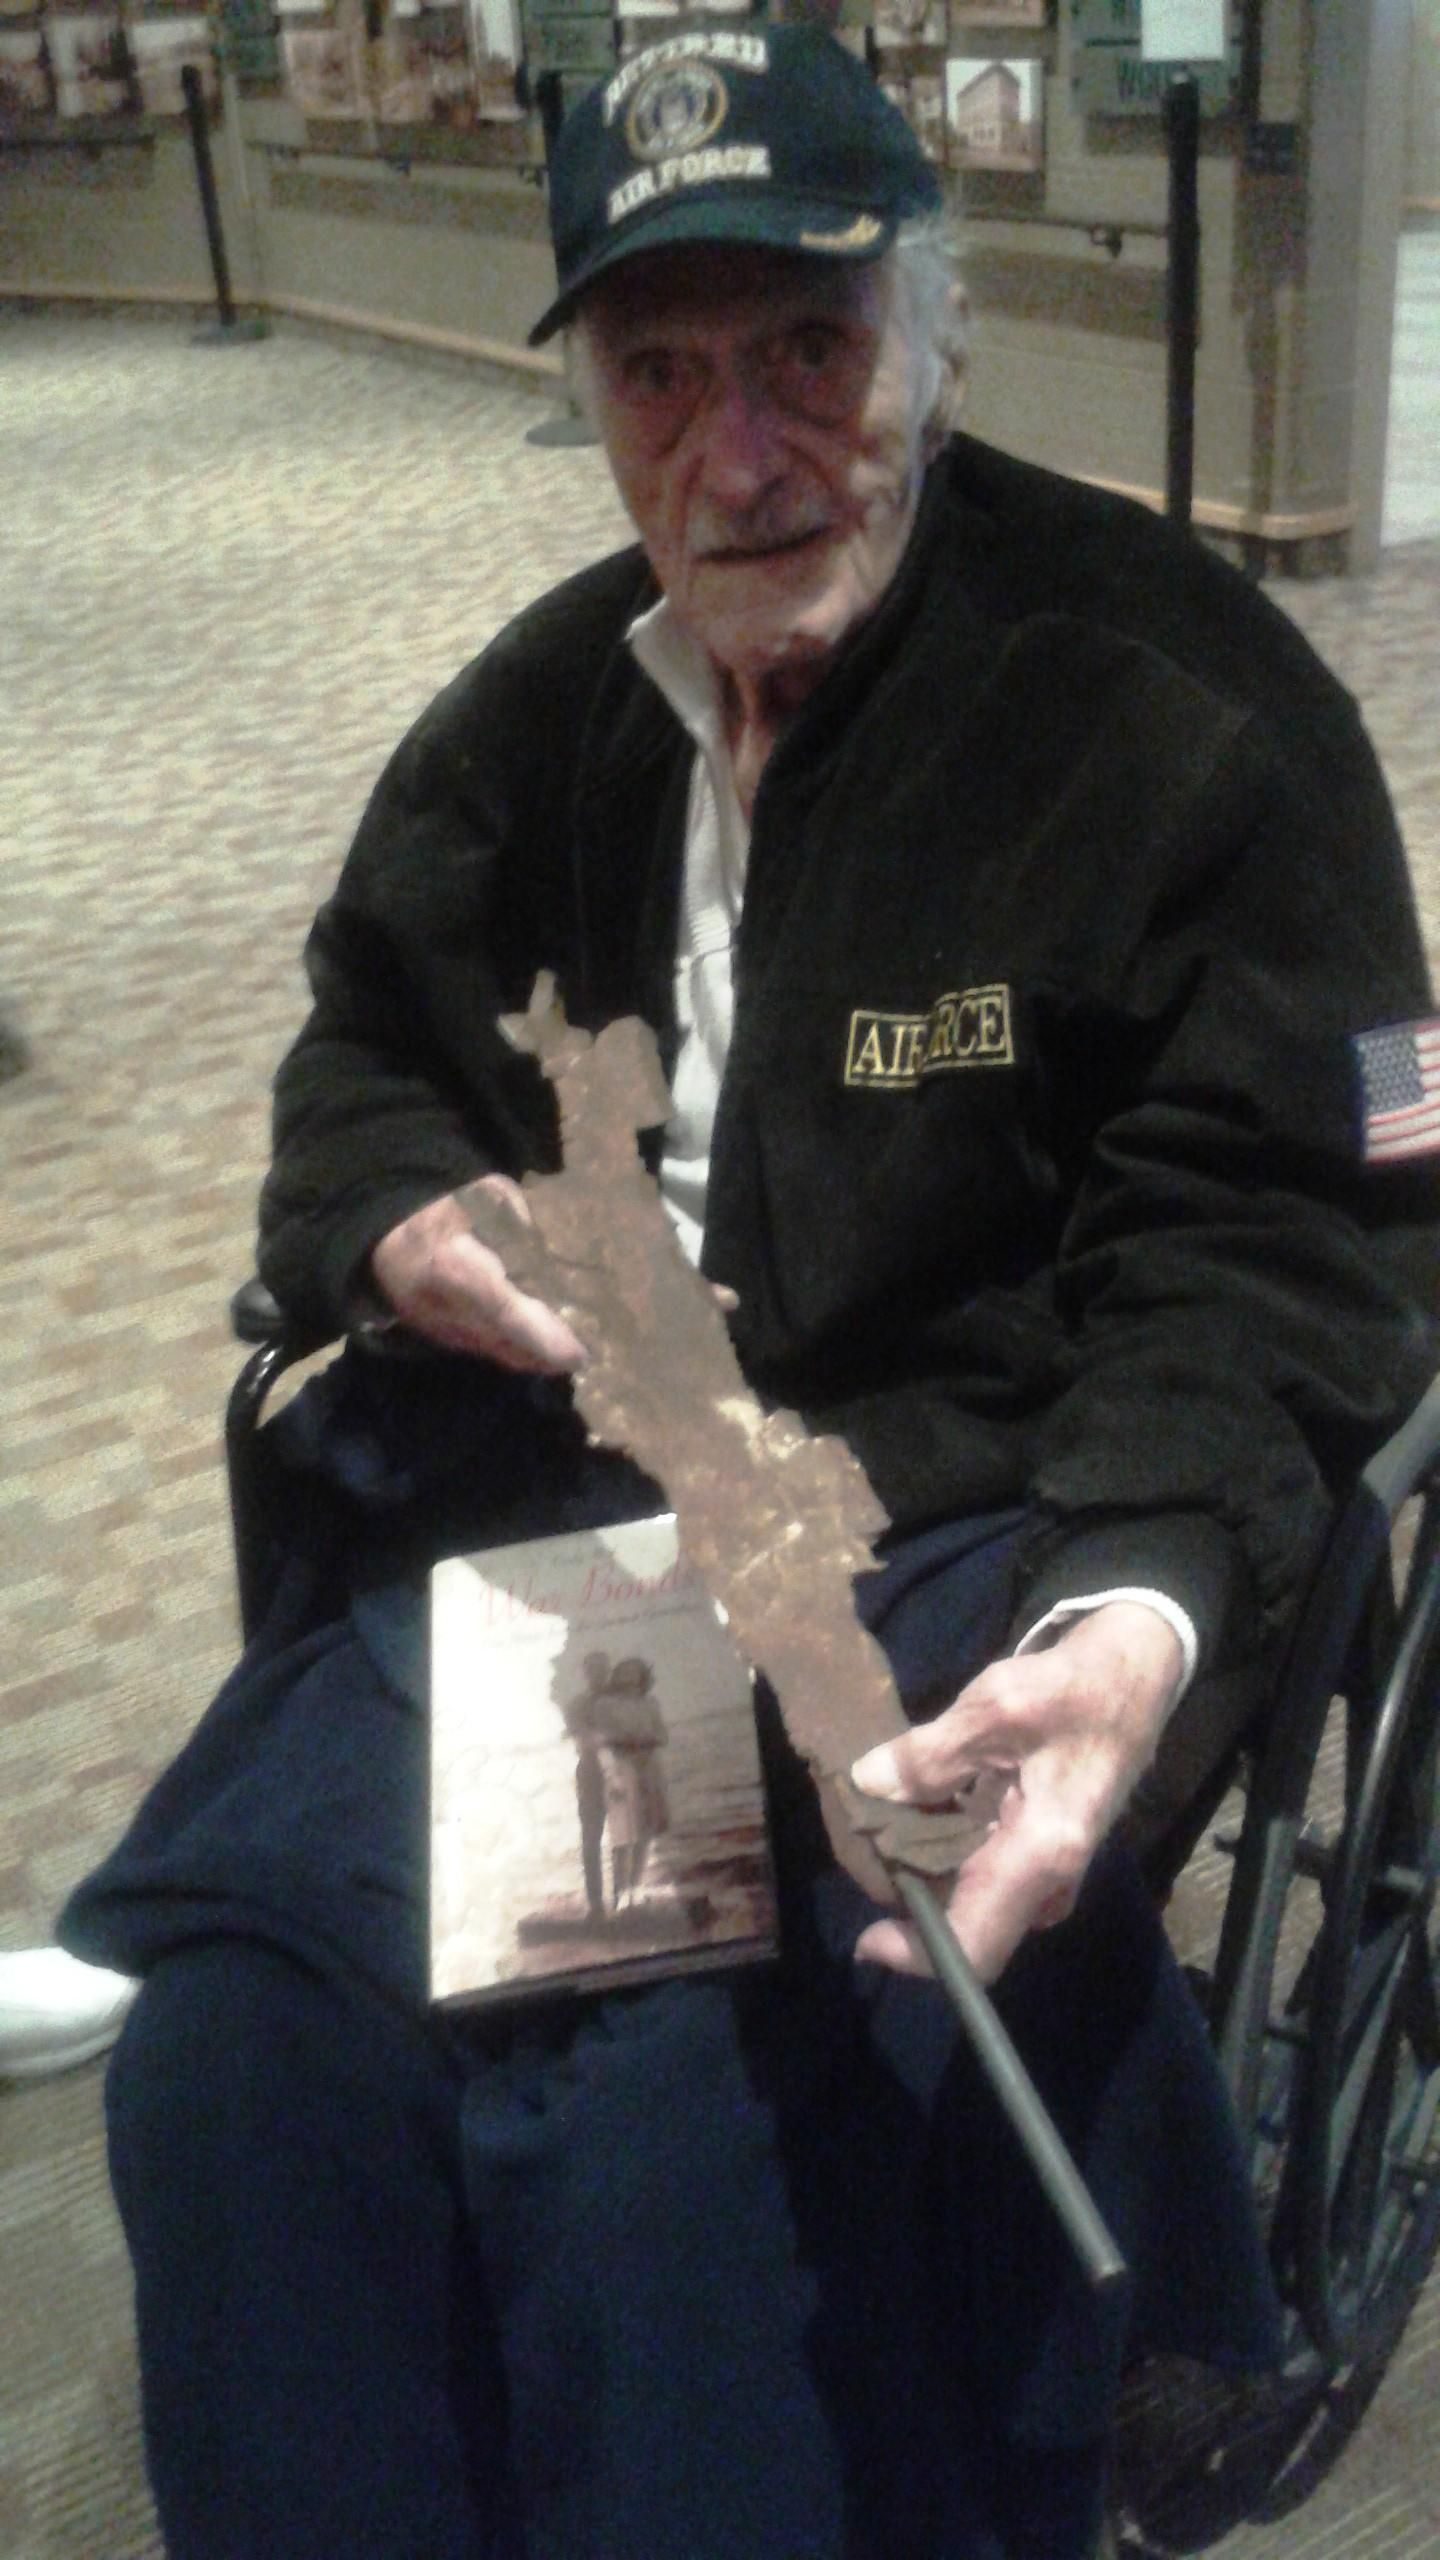 Nick Gaynos holding the piece of shrapnel that landed near him while under fire during the attack on Pearl Harbor 75 years ago. Gaynos died 20 days after this March 11, 2015, photograph. (Courtesy Cindy Hval)